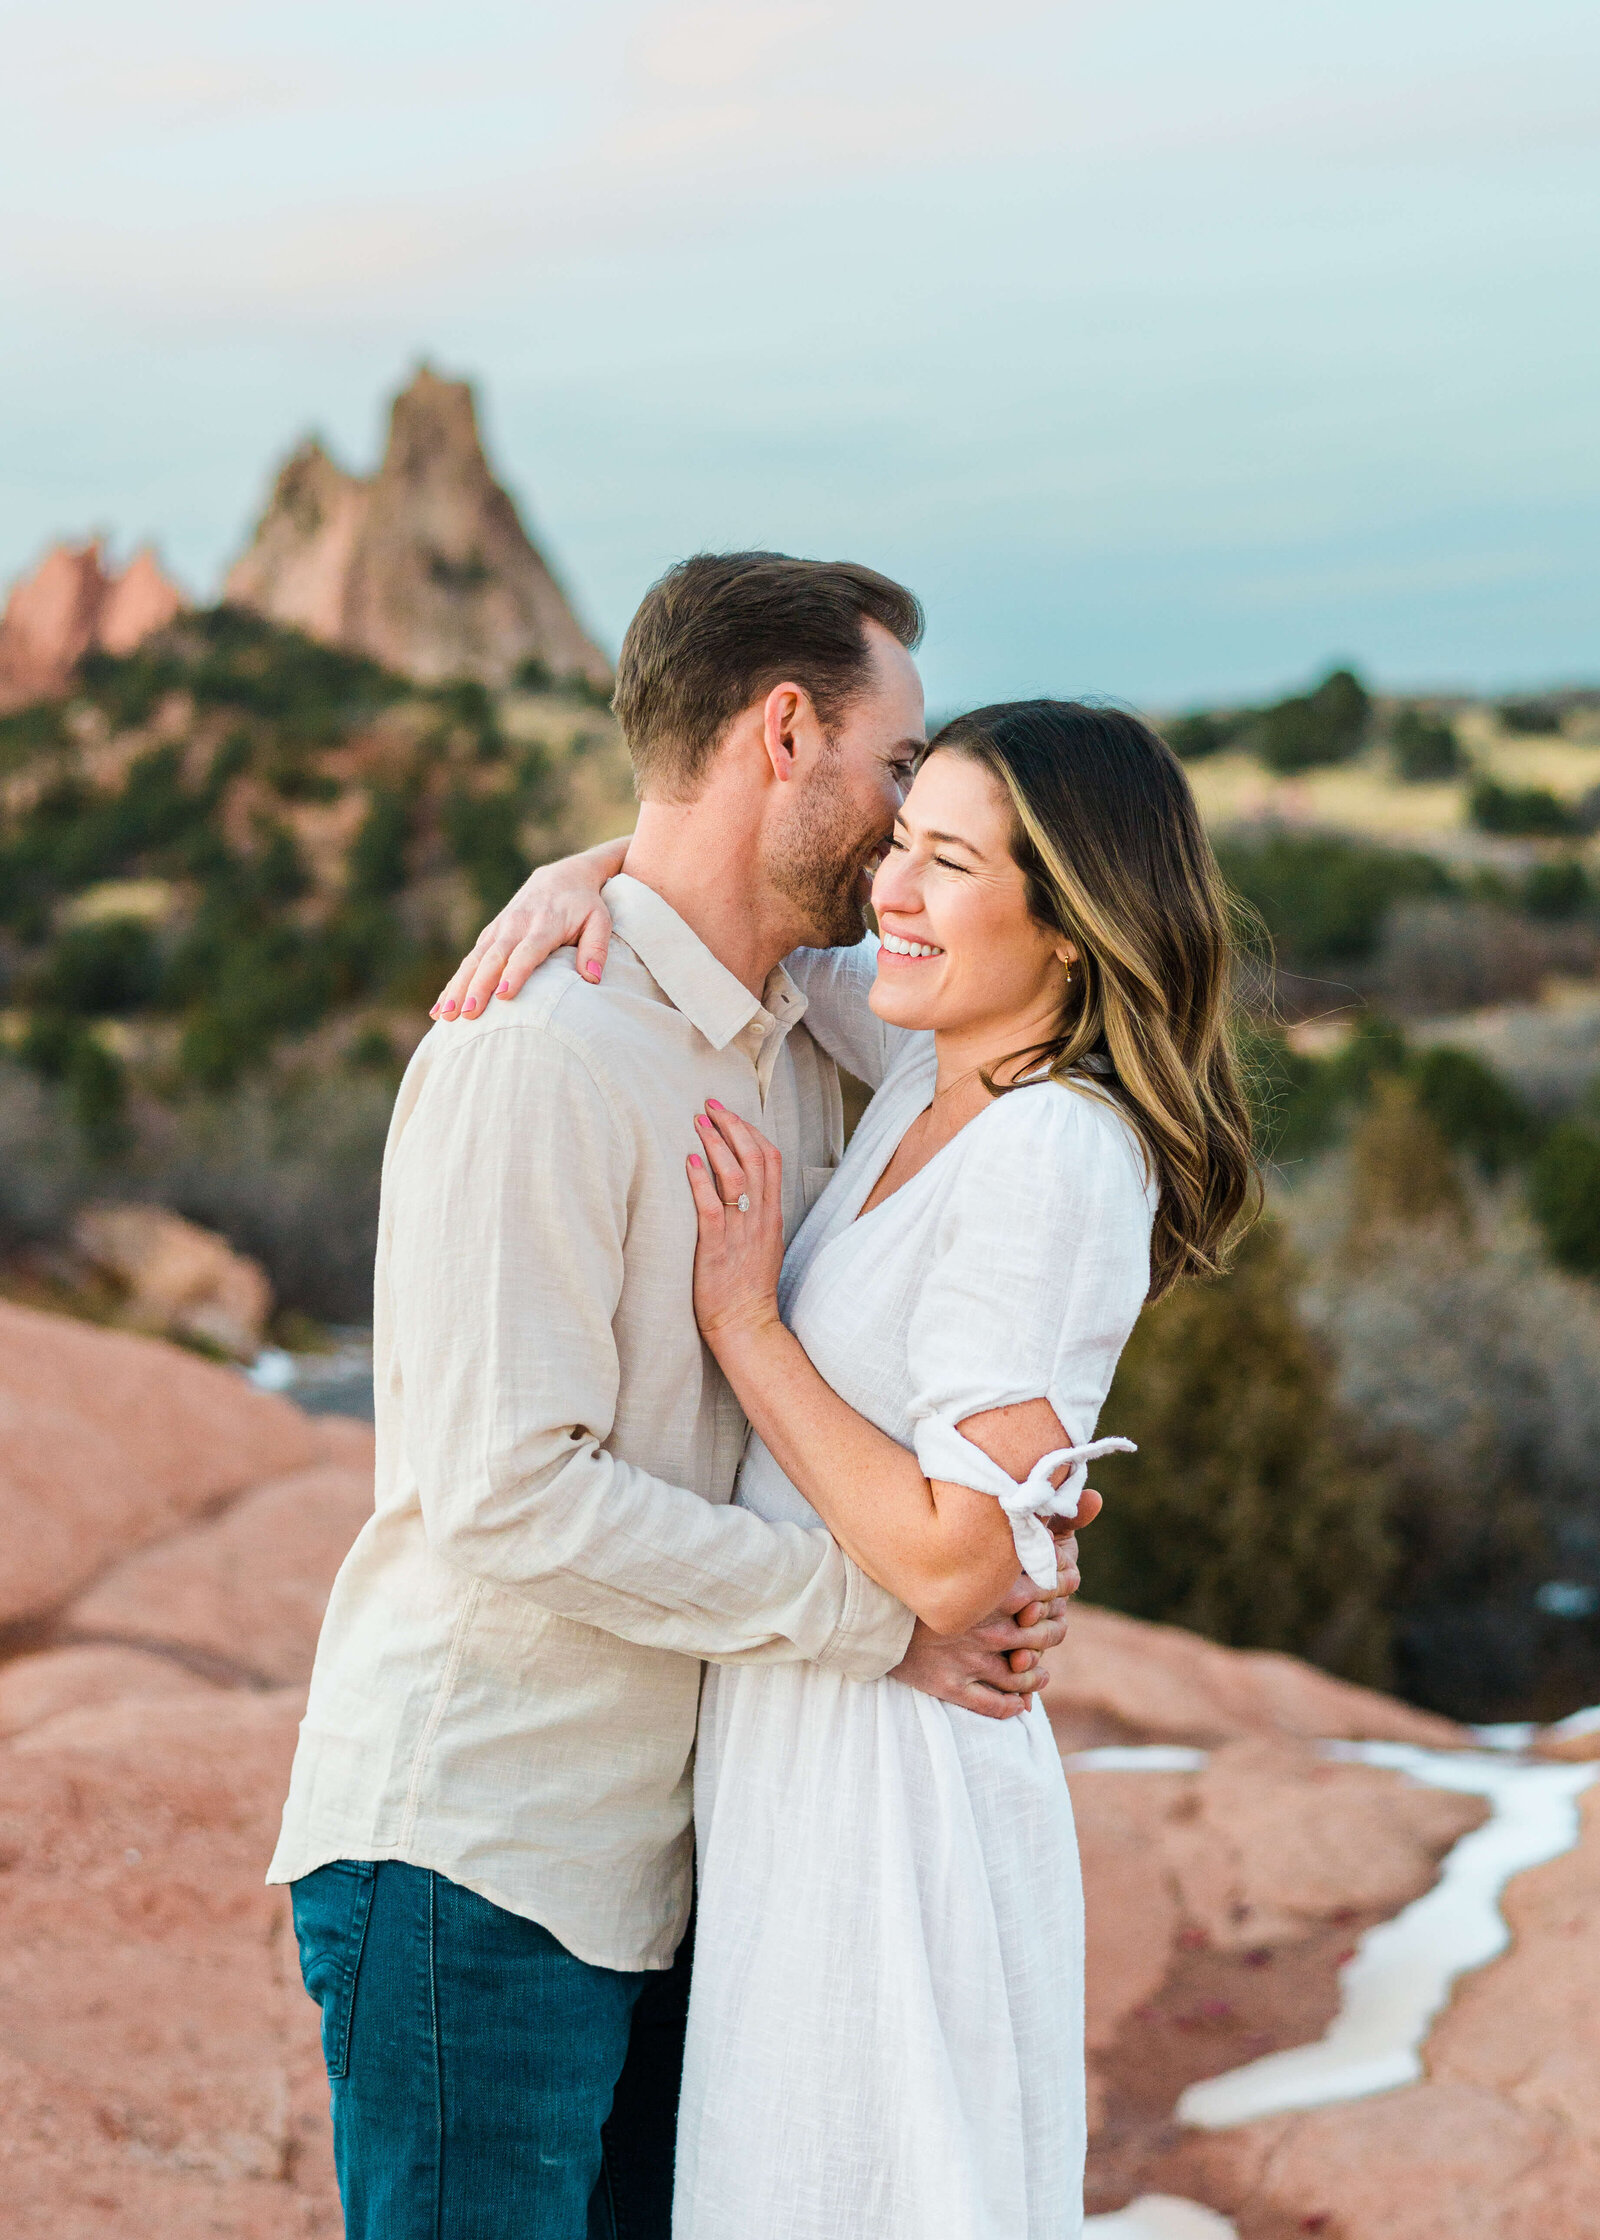 Man and woman snuggling during engagement session by Denver Wedding photographer